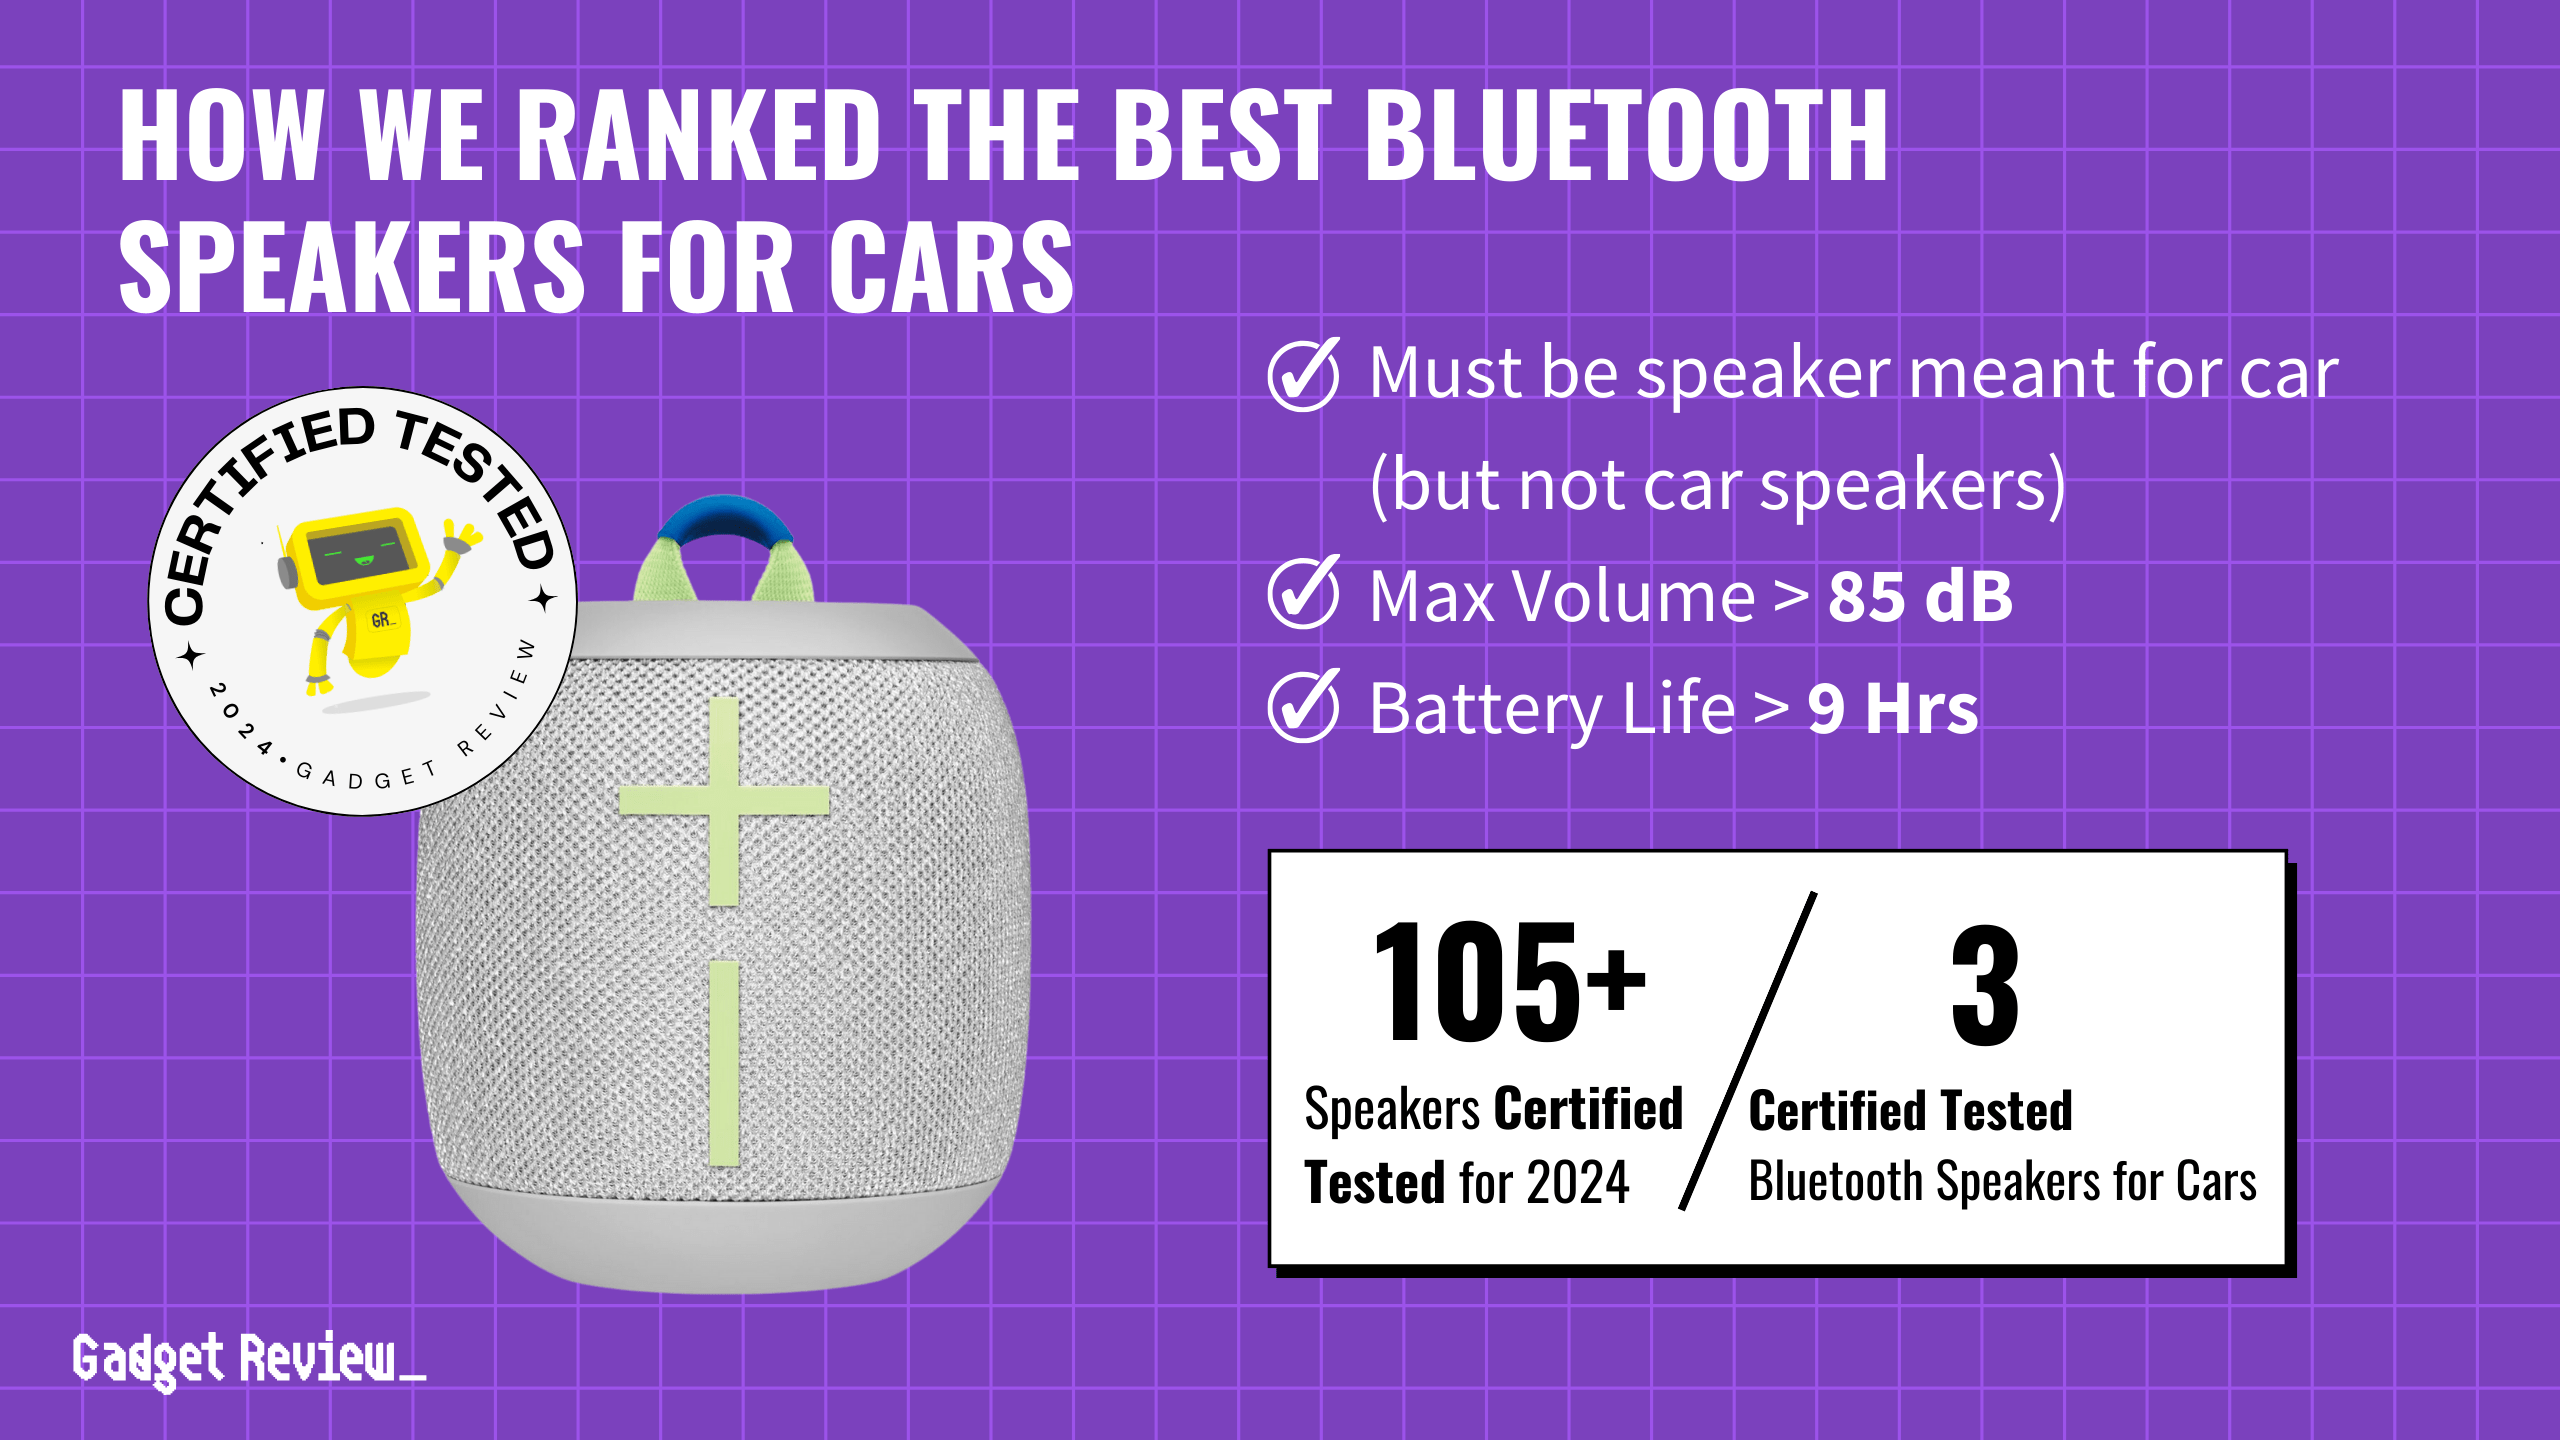 best bluetooth speaker for car guide that shows the top best bluetooth speaker model